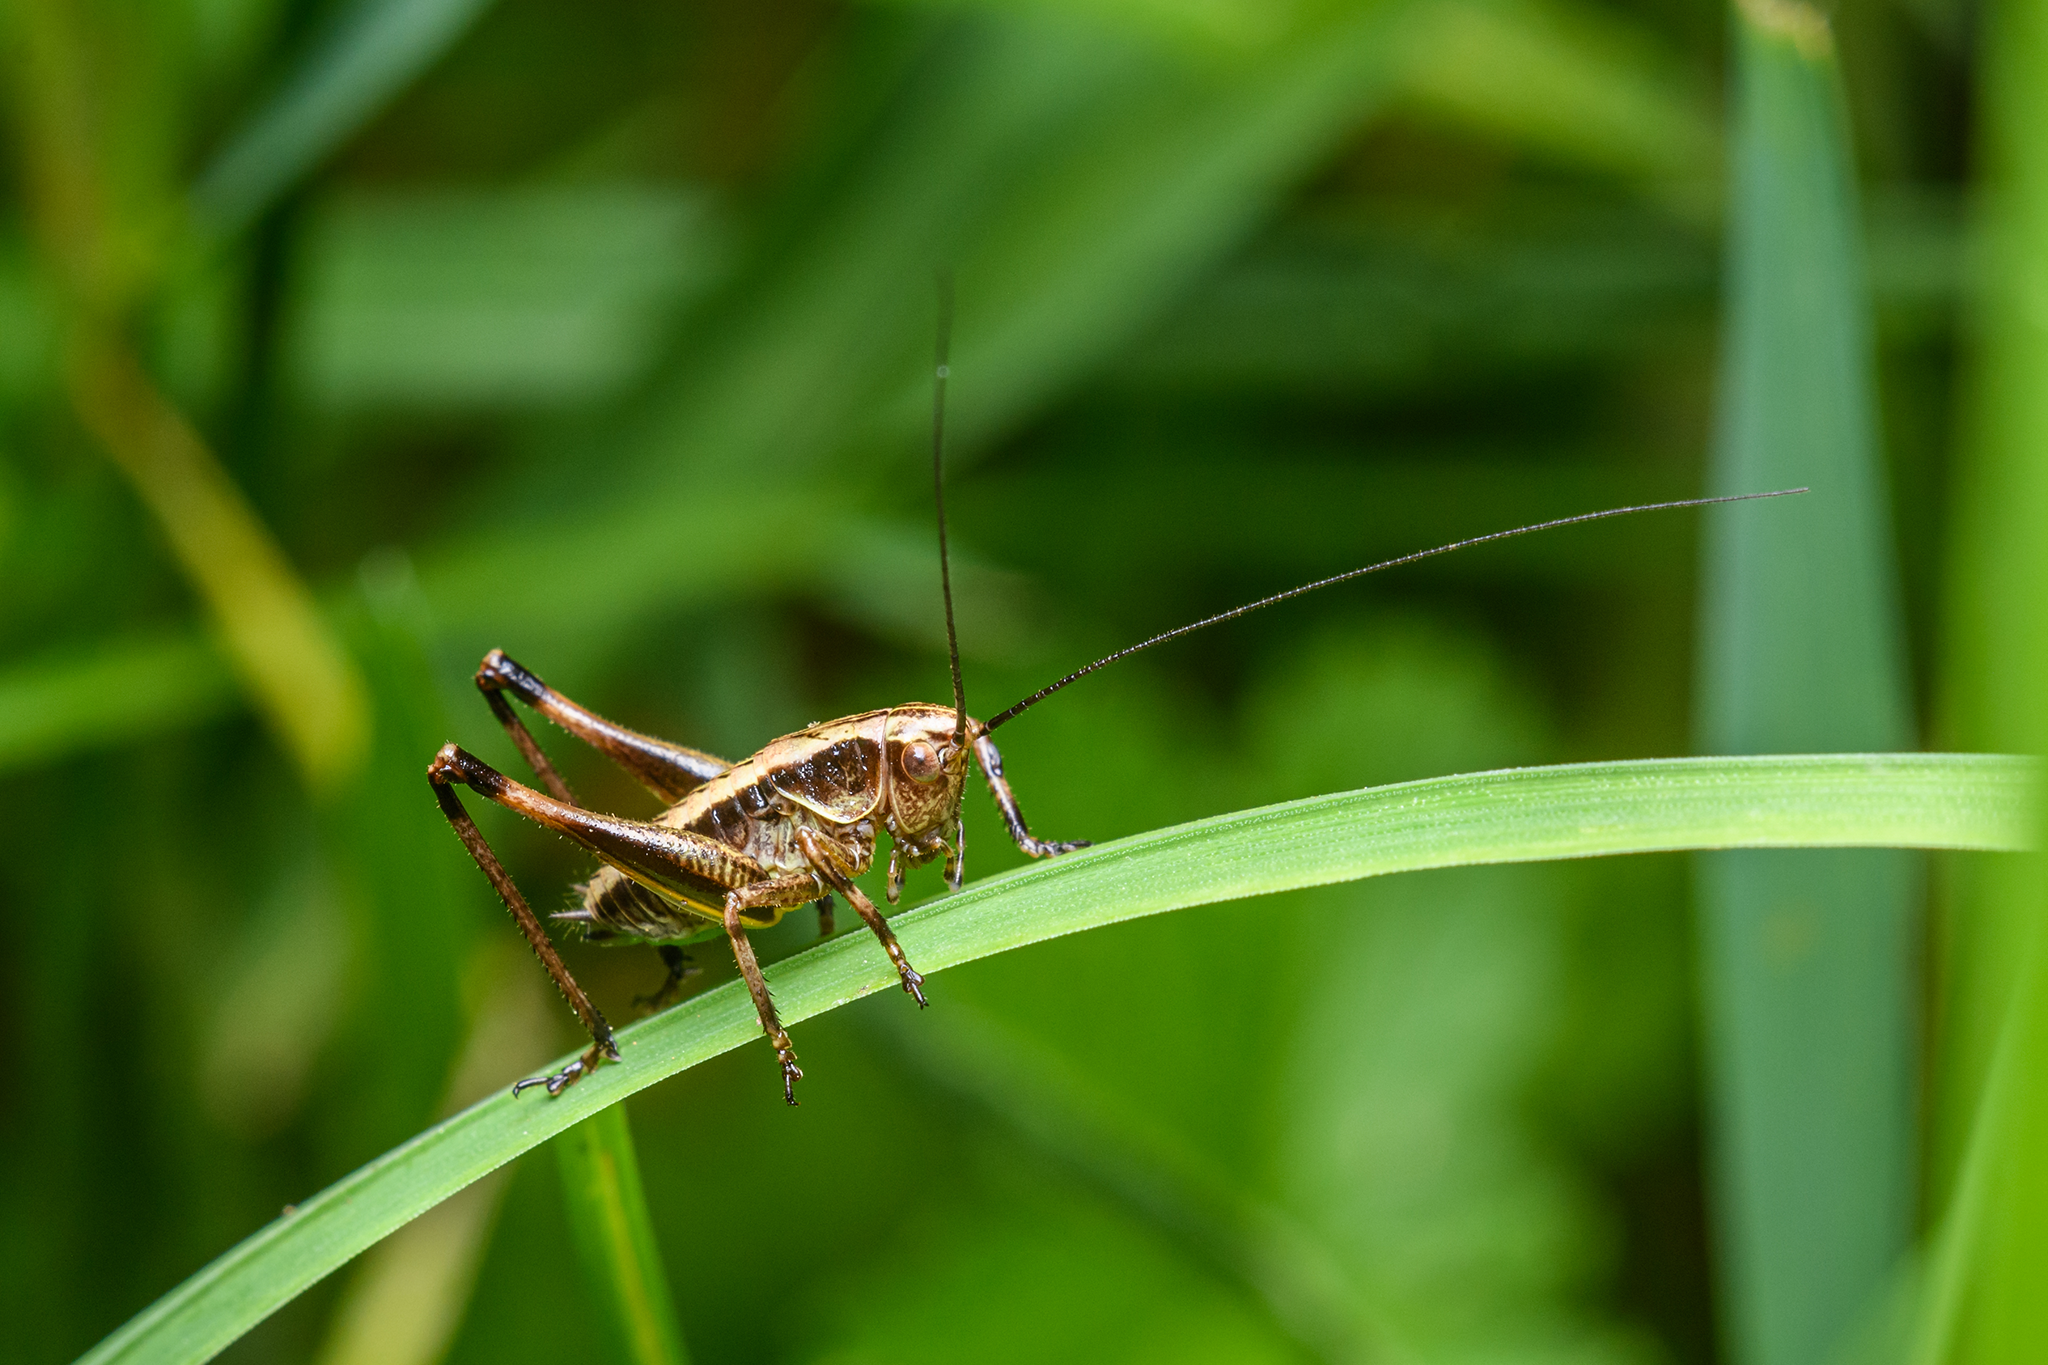 Stick it to crickets in your home and garden